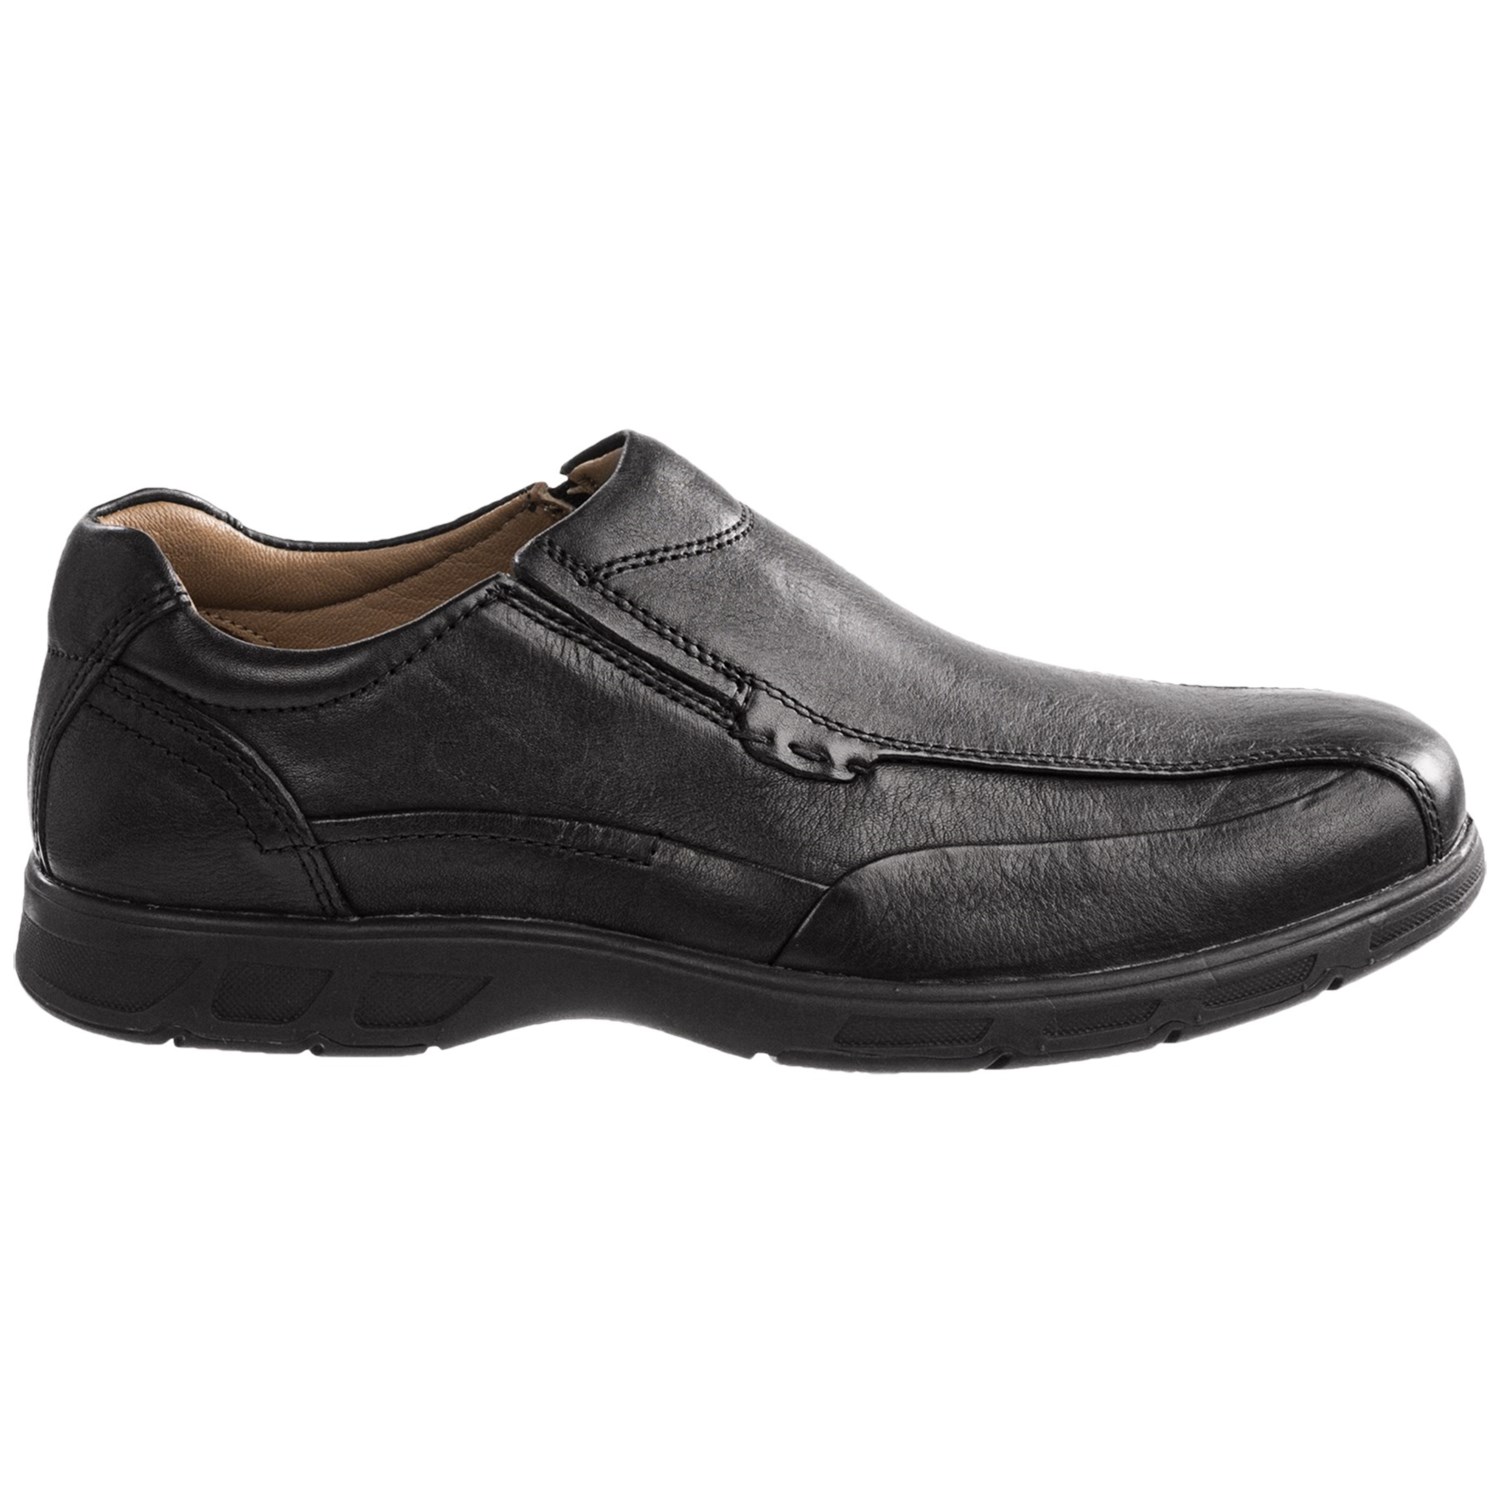 Johnston & Murphy Kendry Shoes (For Men) - Save 28%